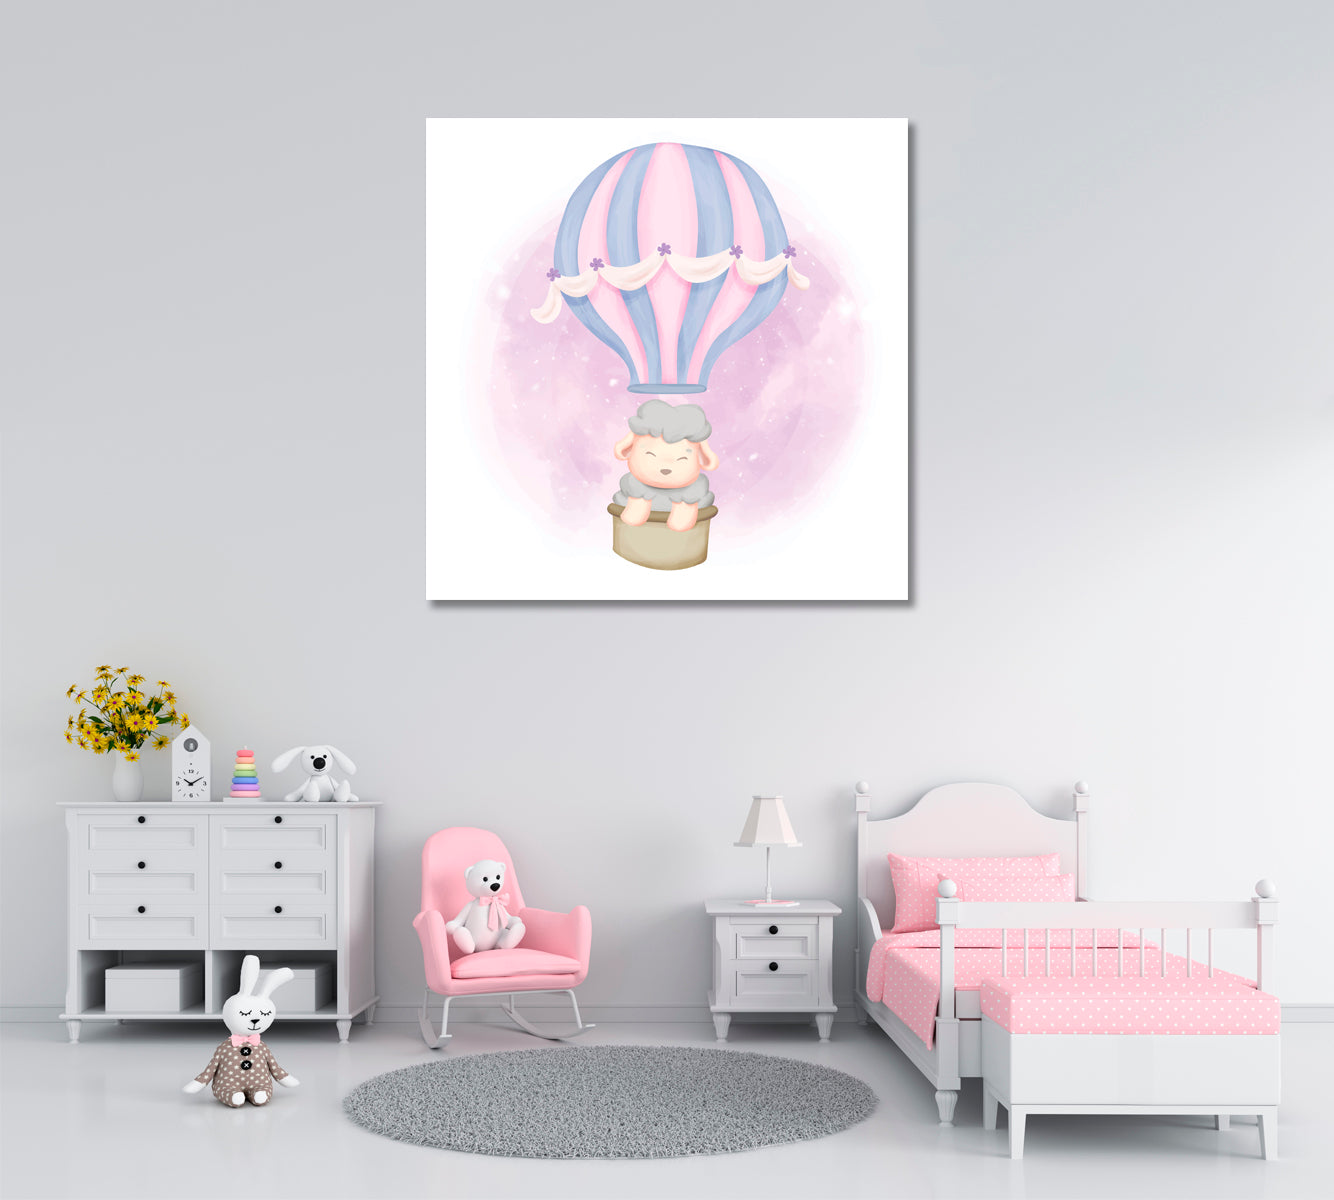 Baby Sheep in Balloon Canvas Print ArtLexy 1 Panel 12"x12" inches 